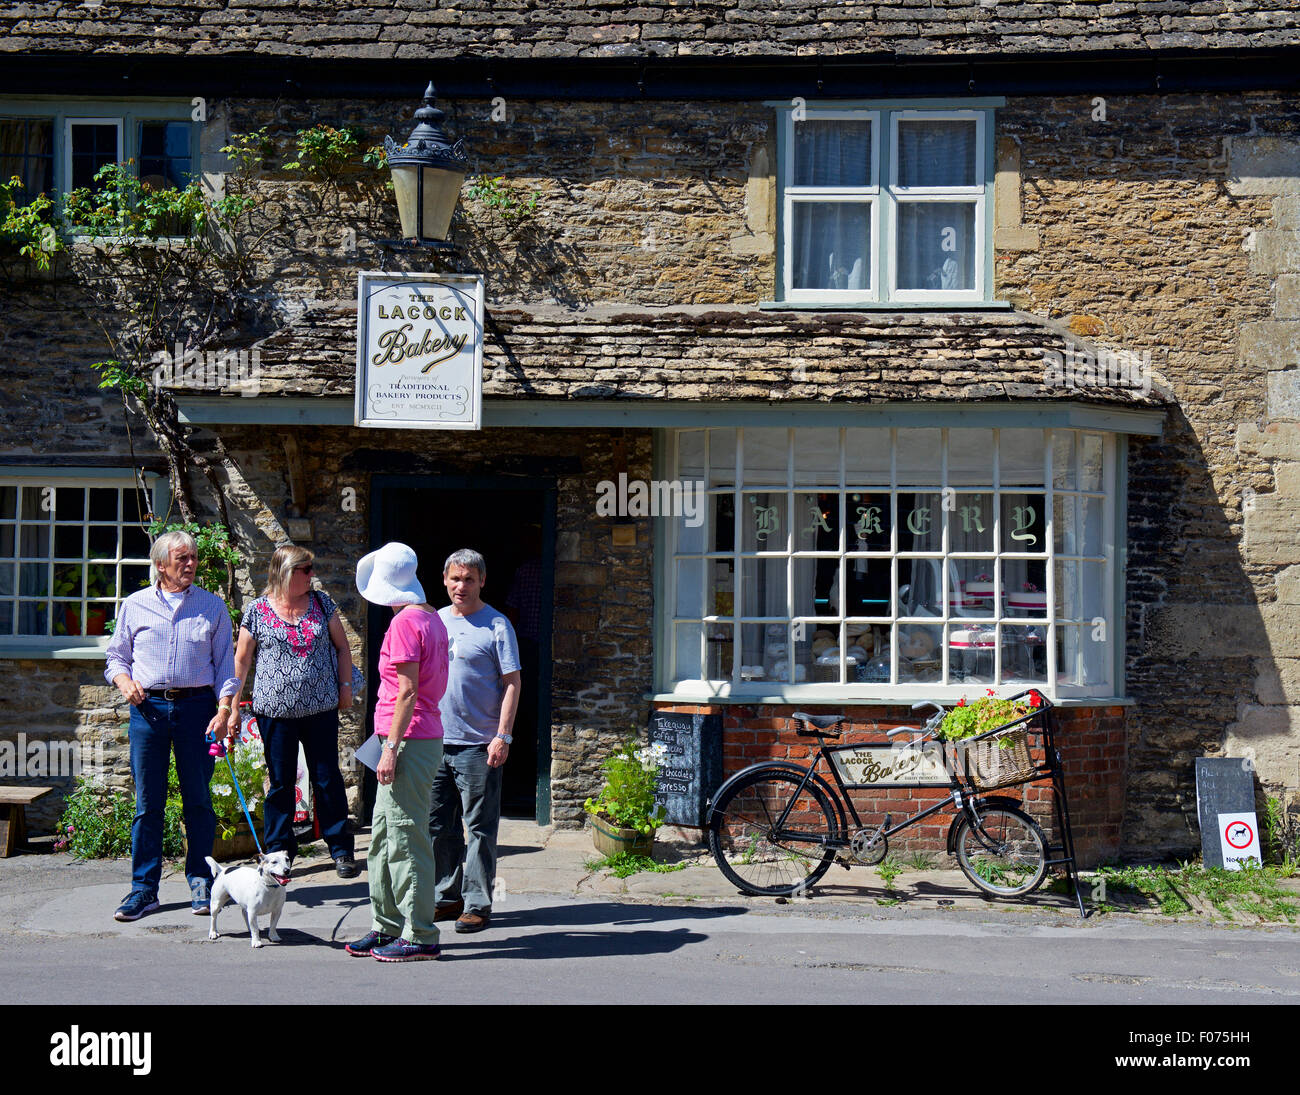 The Lacock Bakery, in the village of Lacock, Wiltshire, England Stock Photo